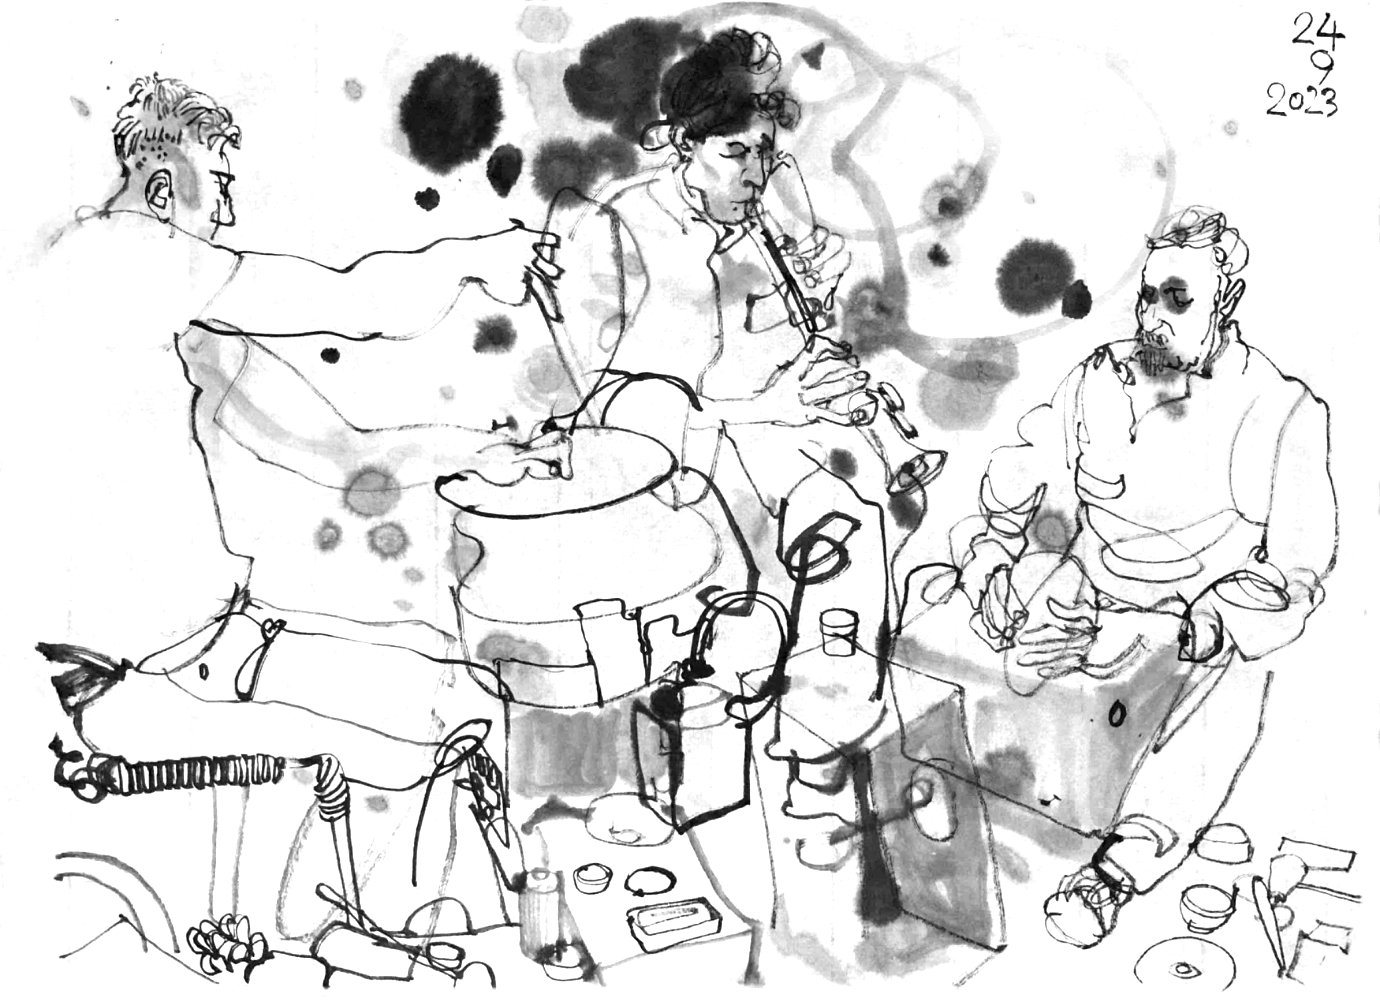 Ink drawing of three musicians.